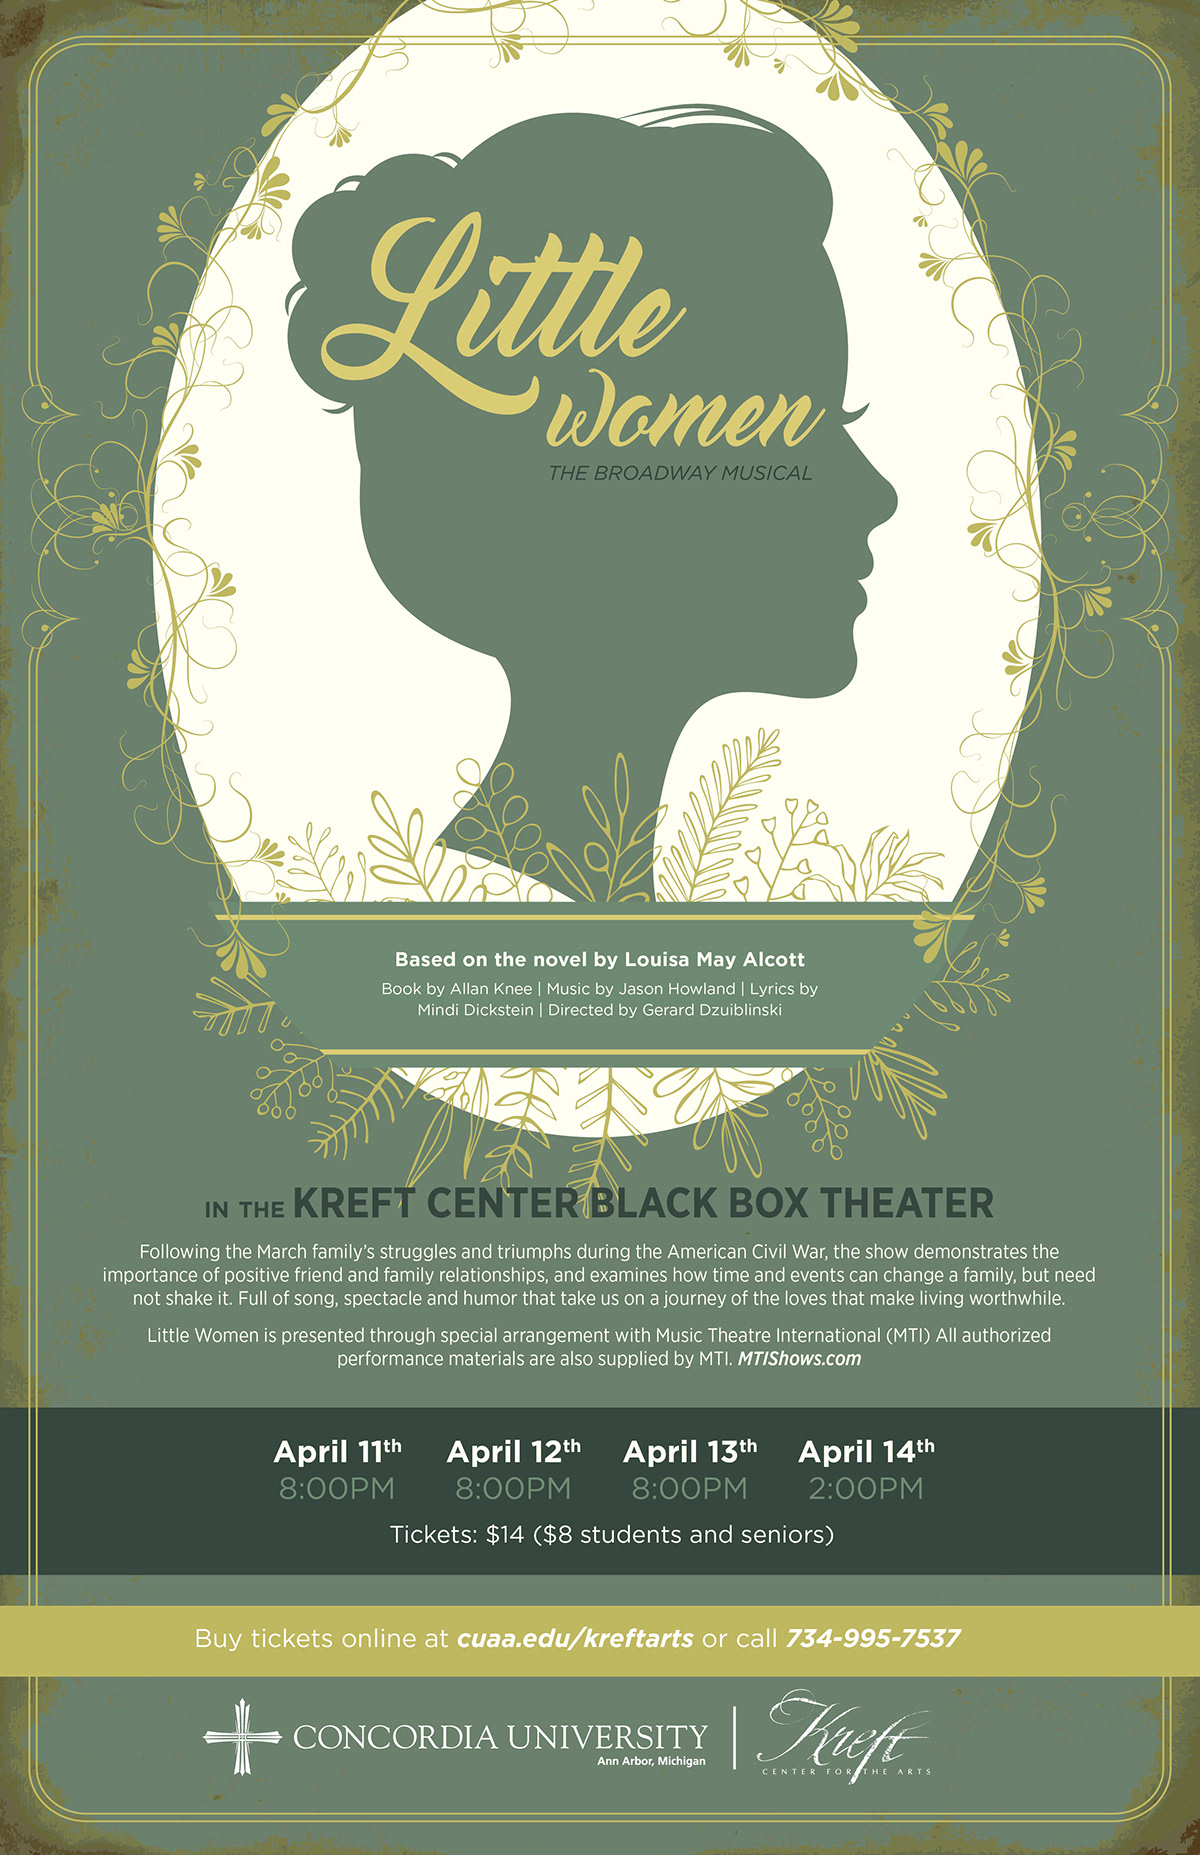 Silhouetted woman framed by floral accents with musical title "Little Women"